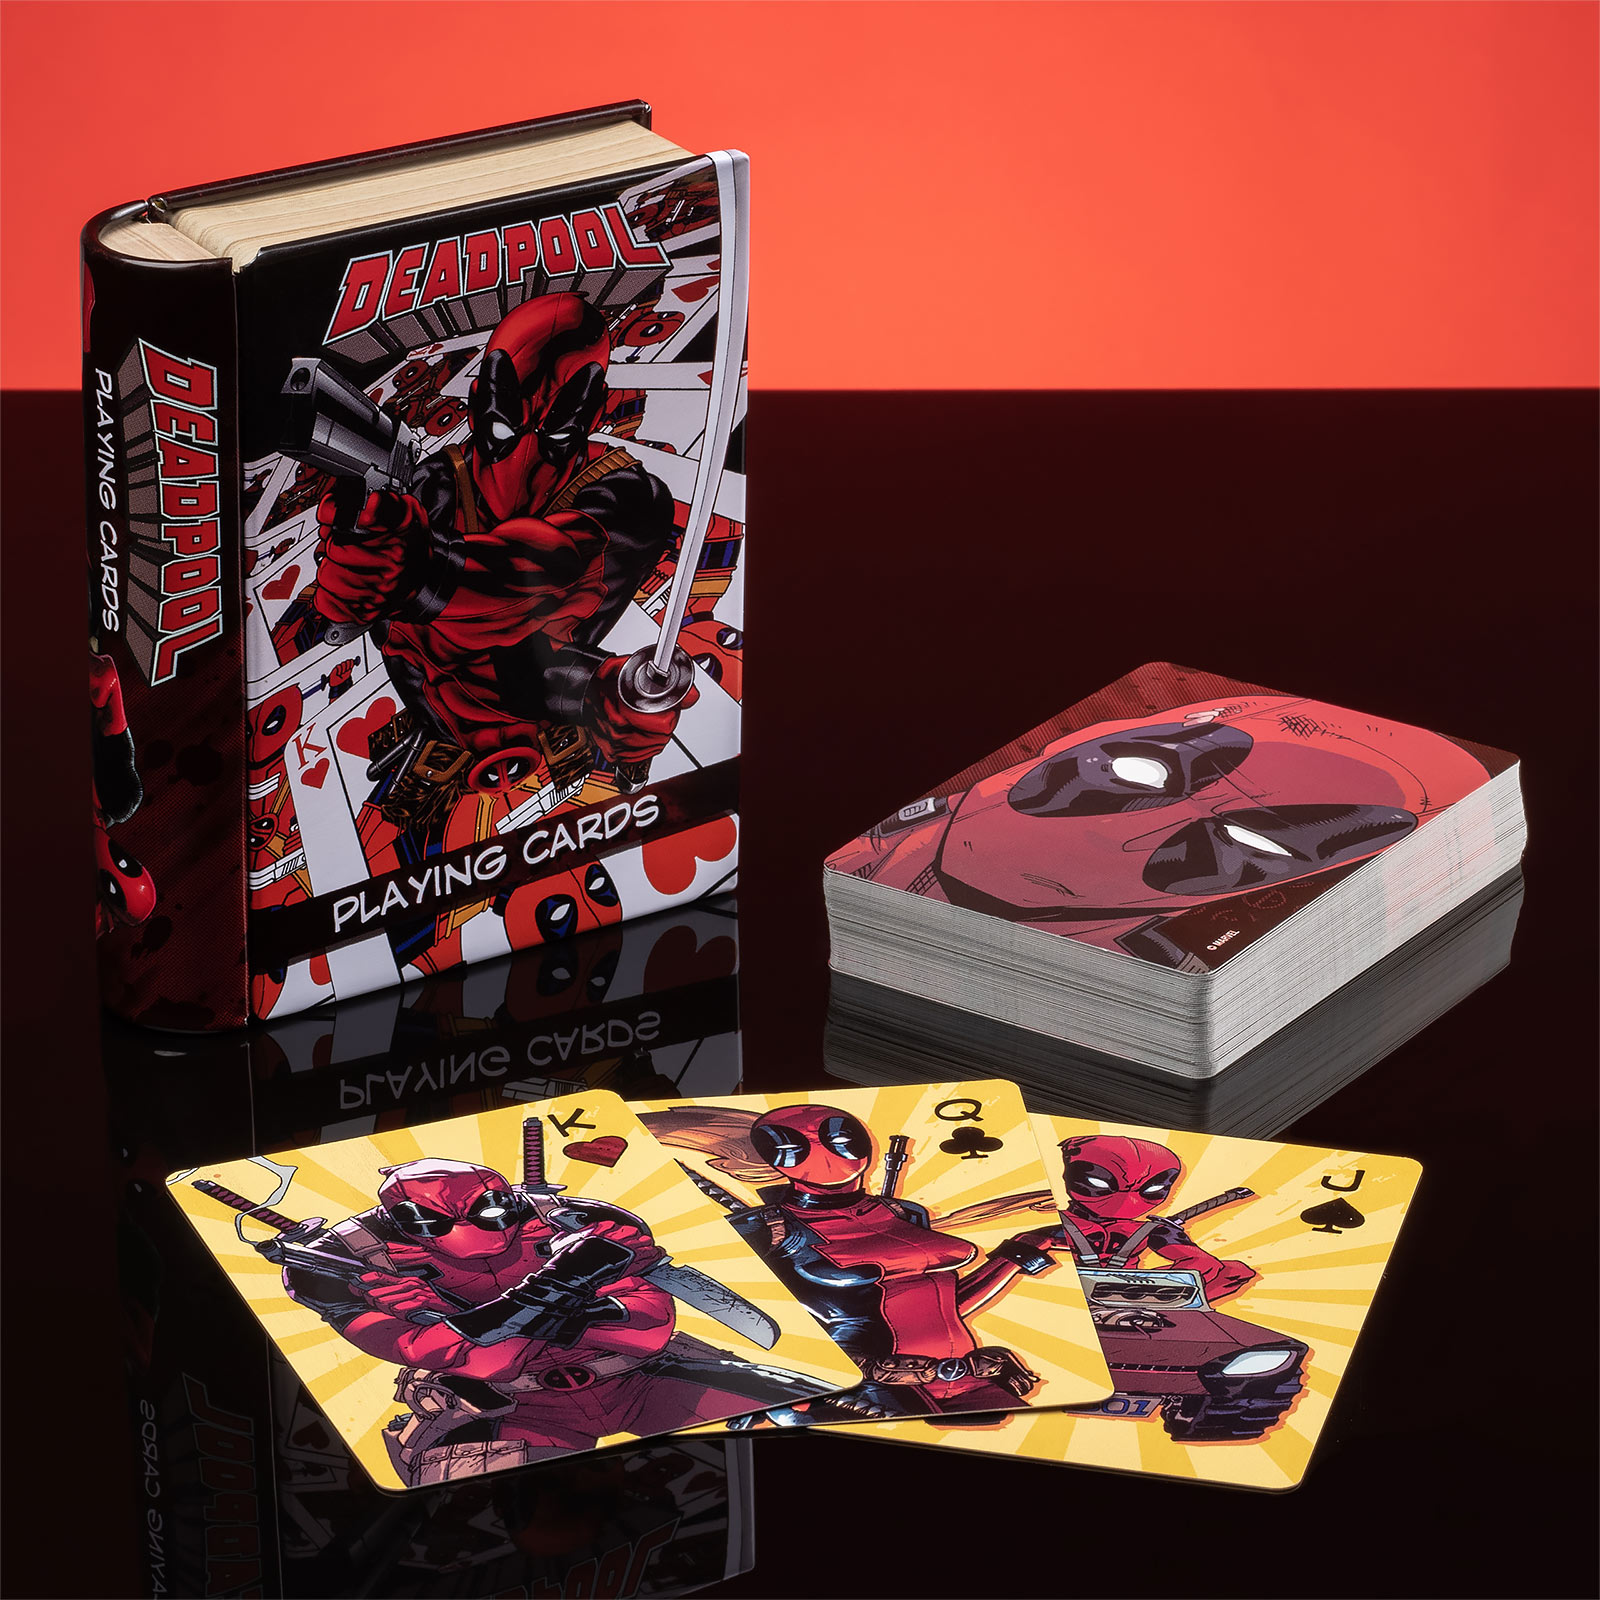 Deadpool playing cards in metal box